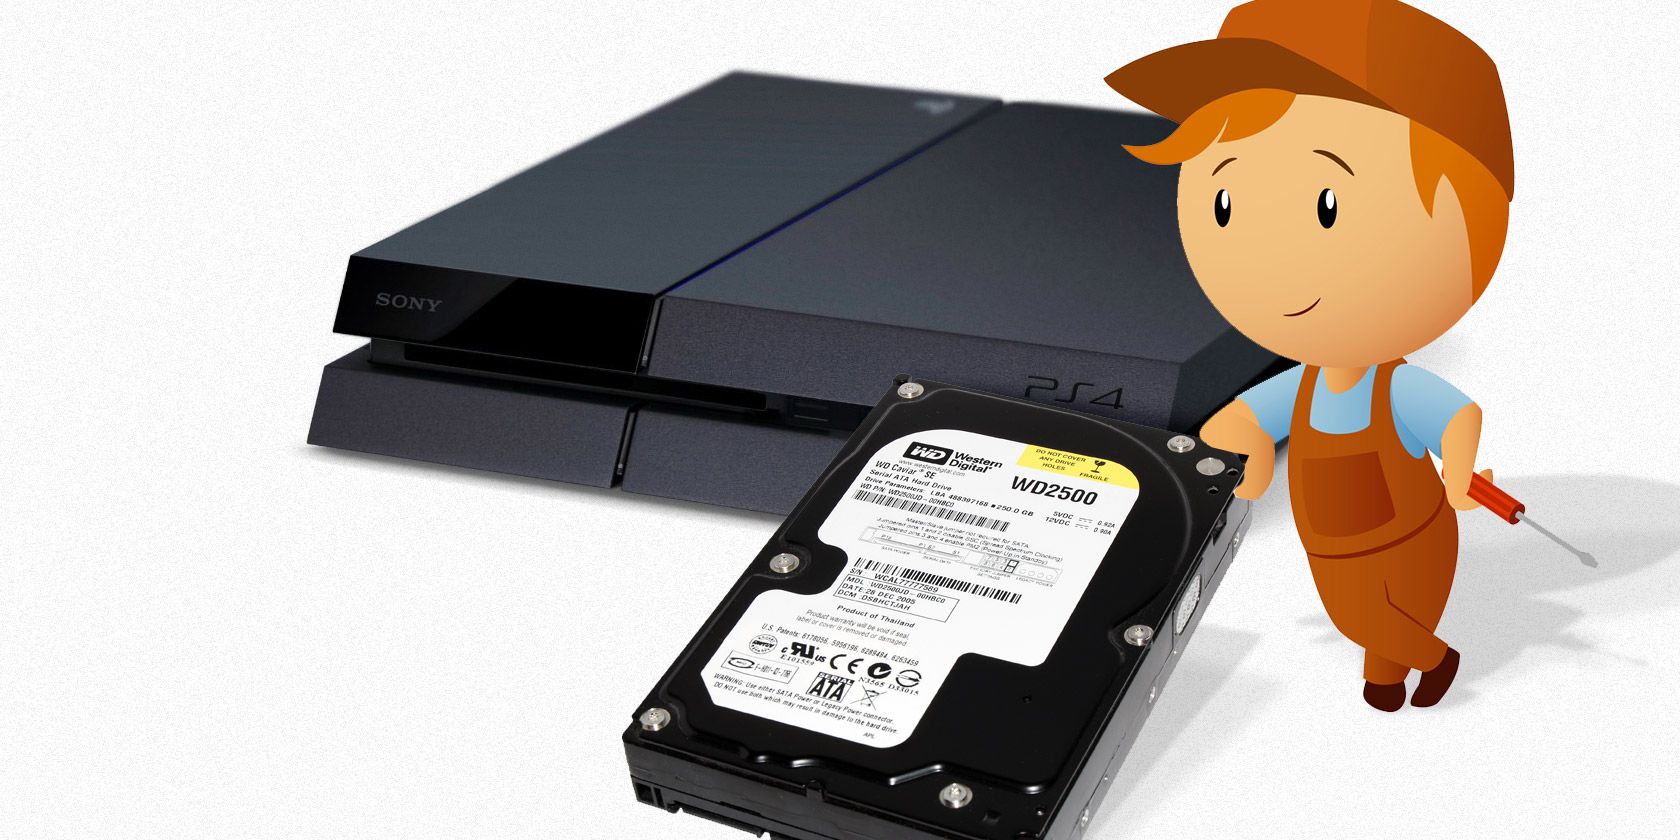 Cartoon repairman leaning on hard drive next to PS4 console